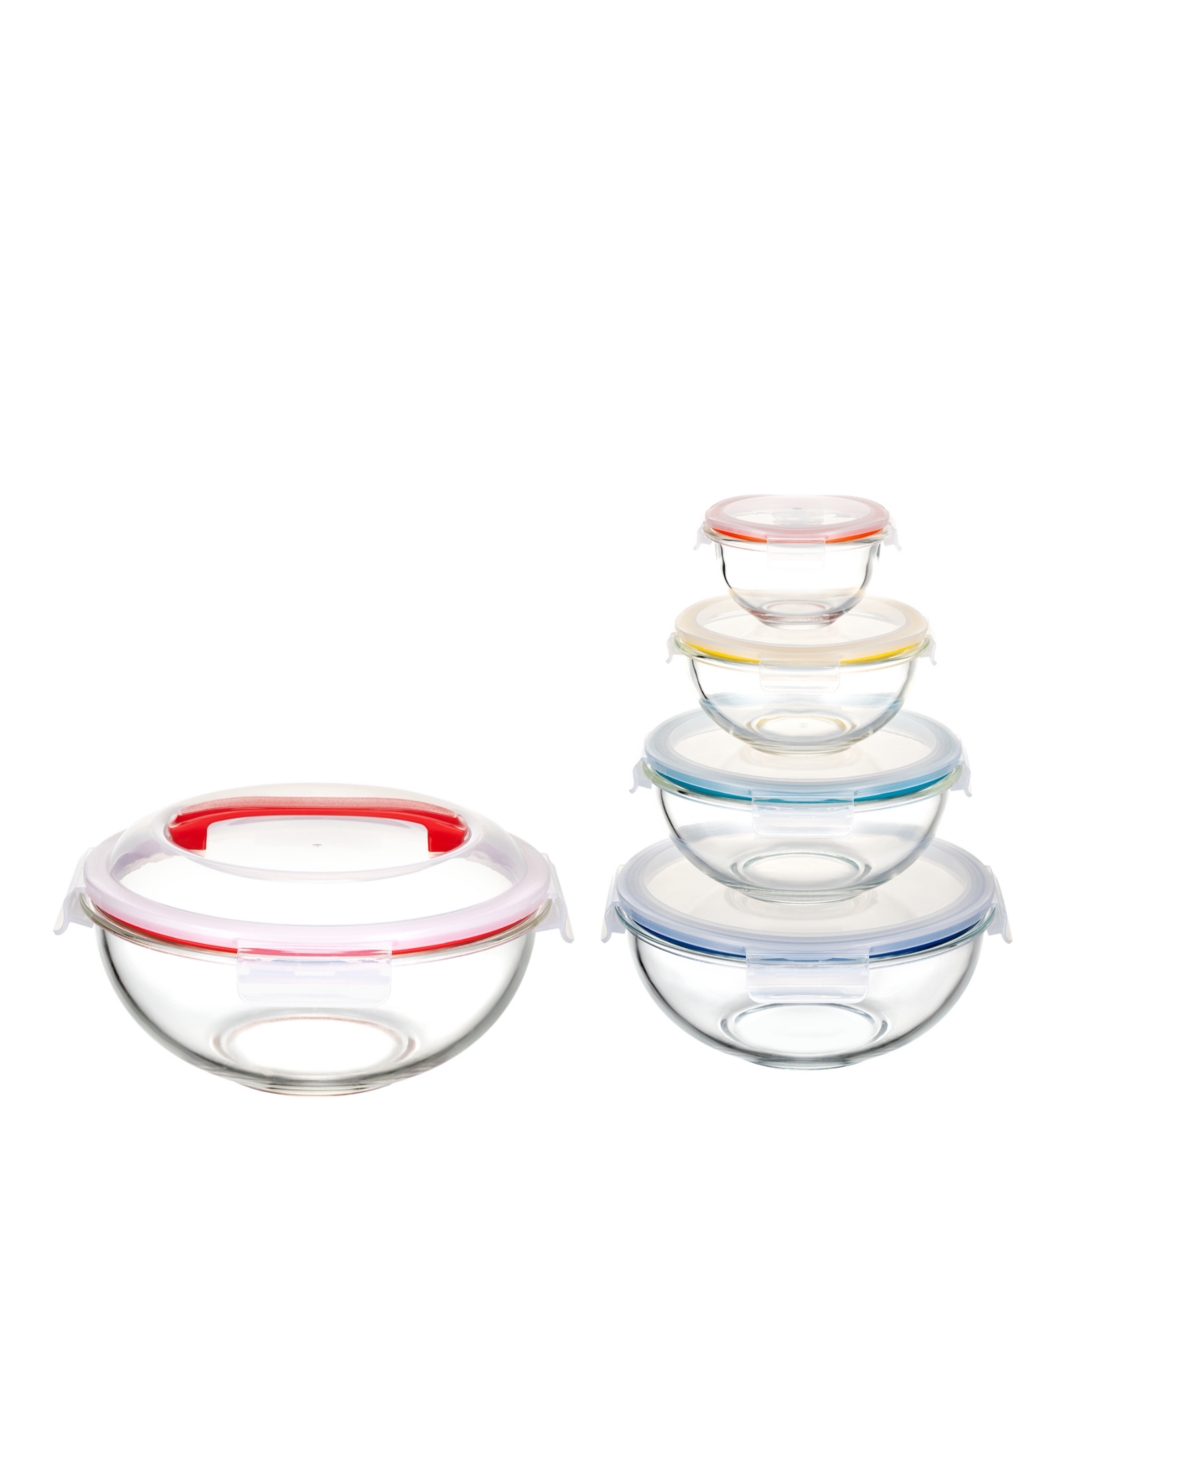 Shop Genicook 5 Pc Container Nesting Borosilicate Glass Mixing Bowl Set With Locking Lids And Carry Handle In Multicolor